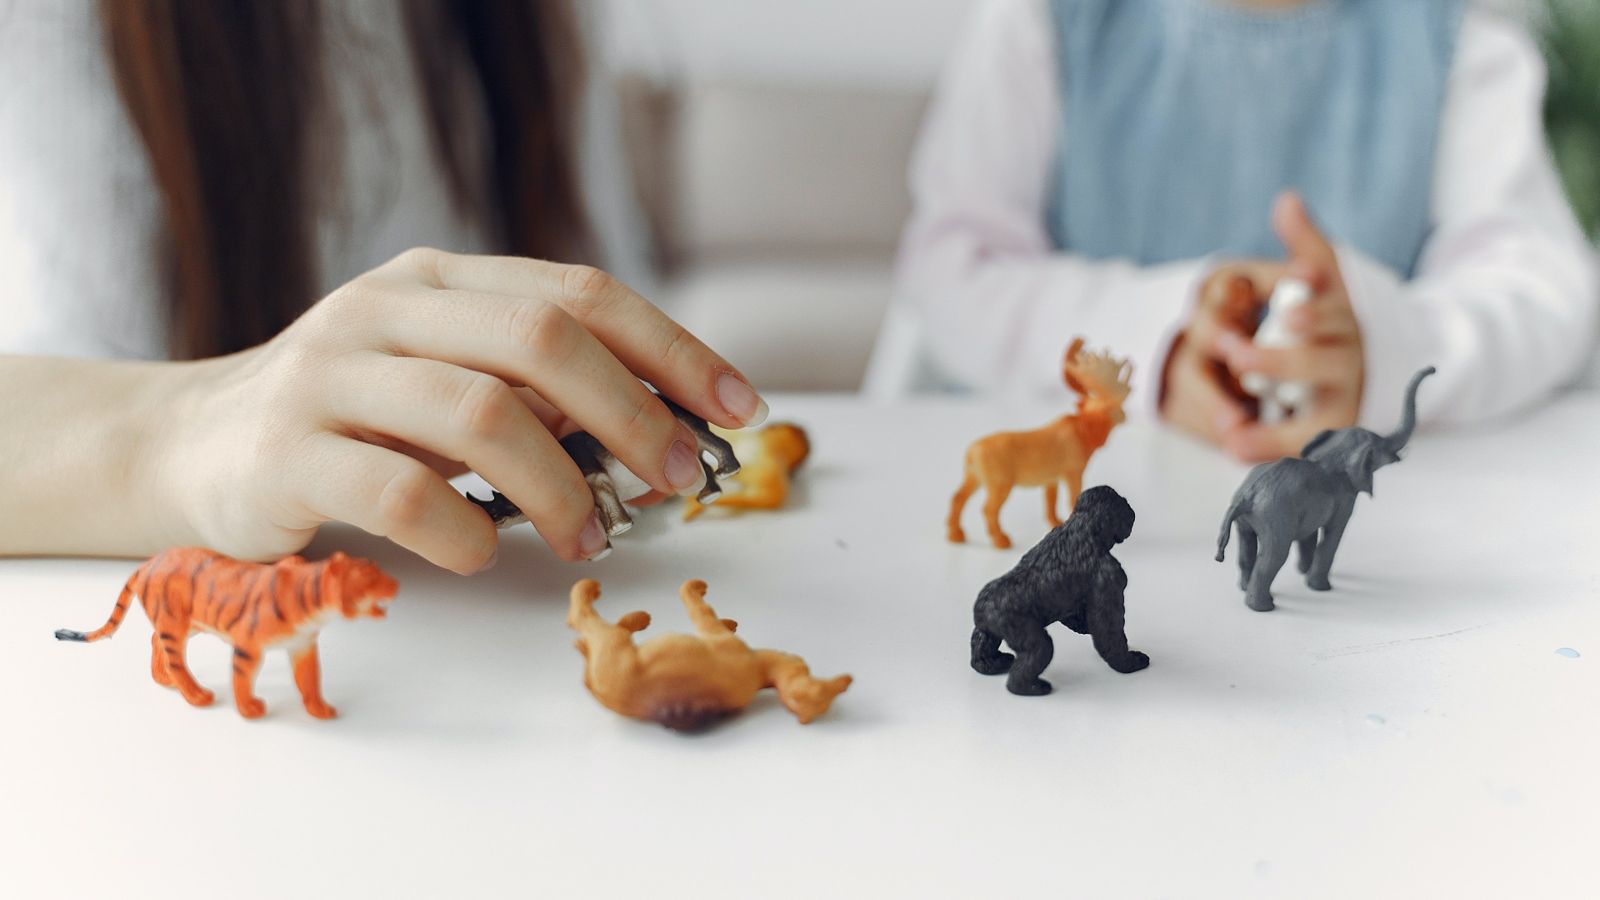 Two children playing with toy animals